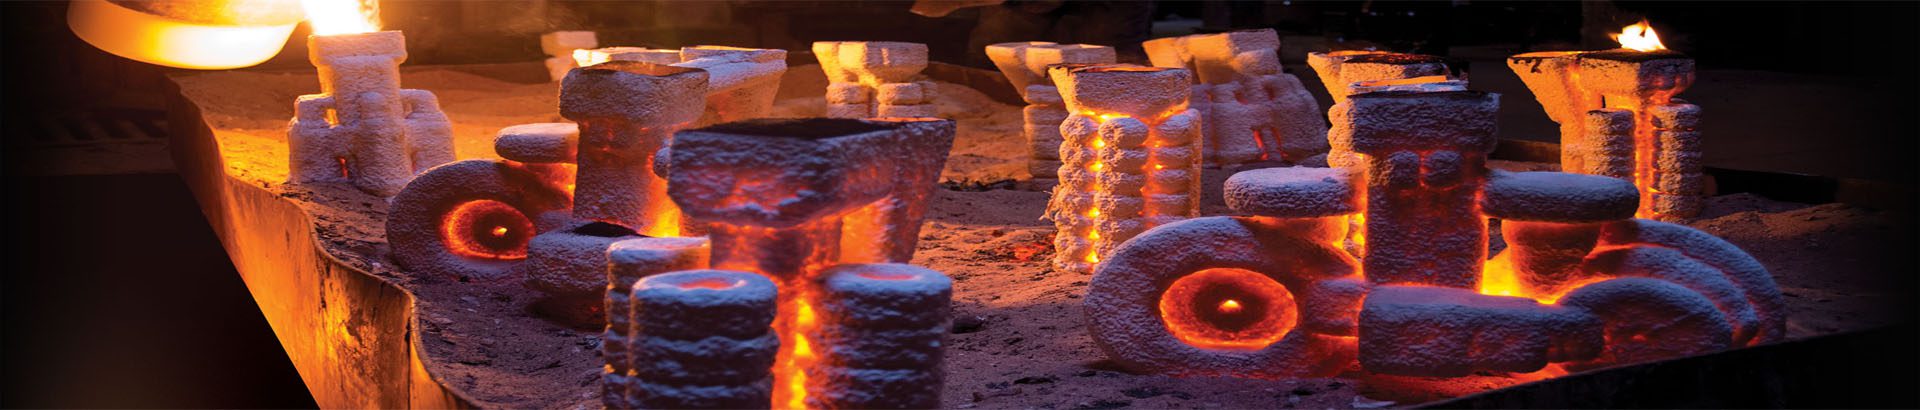 Casting process of water glass casting